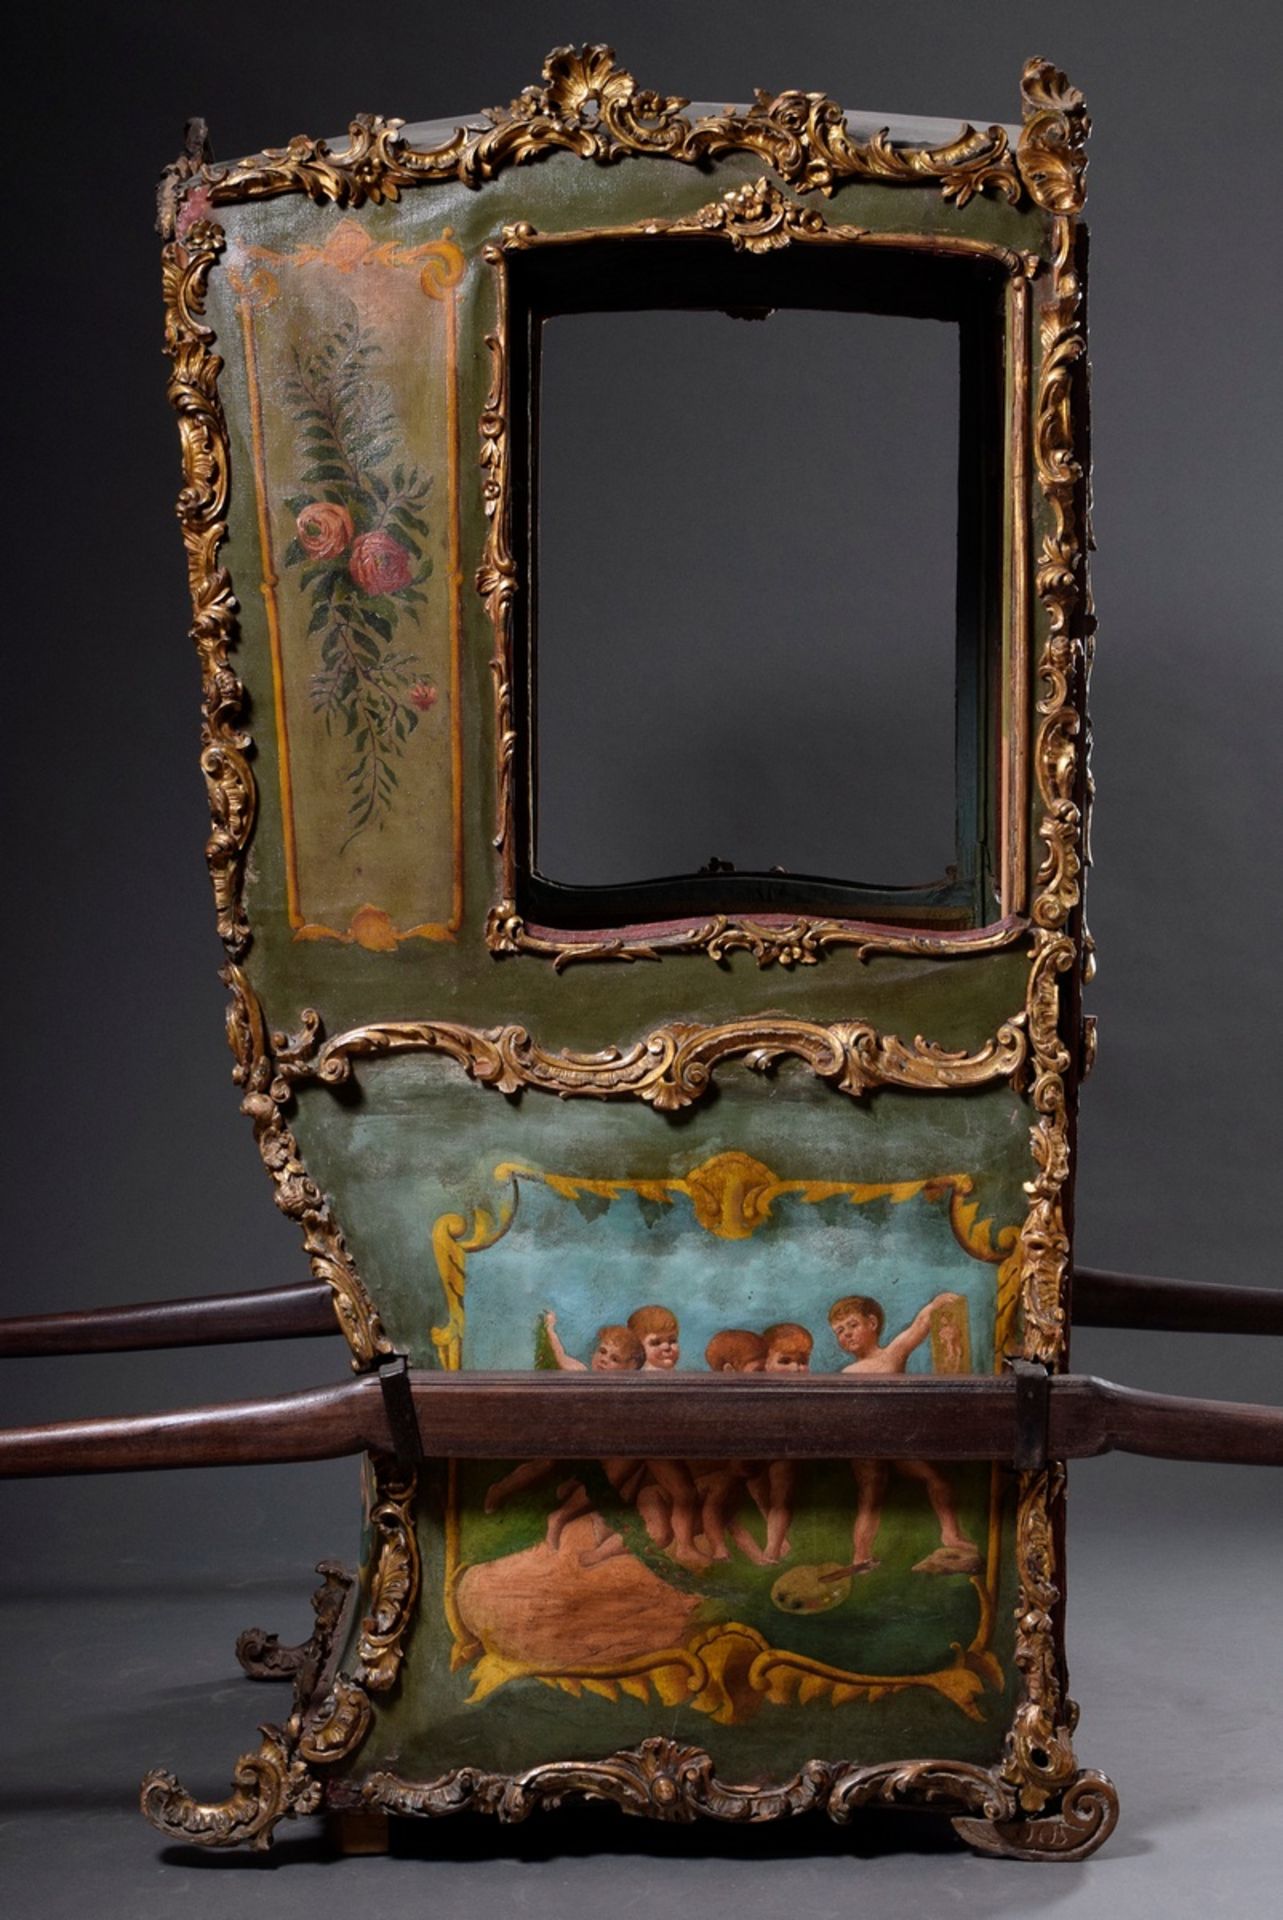 Rococo-style sedan chair with painted canvas covering "Putten-Allegorien" and carved rocaille mould - Image 3 of 15